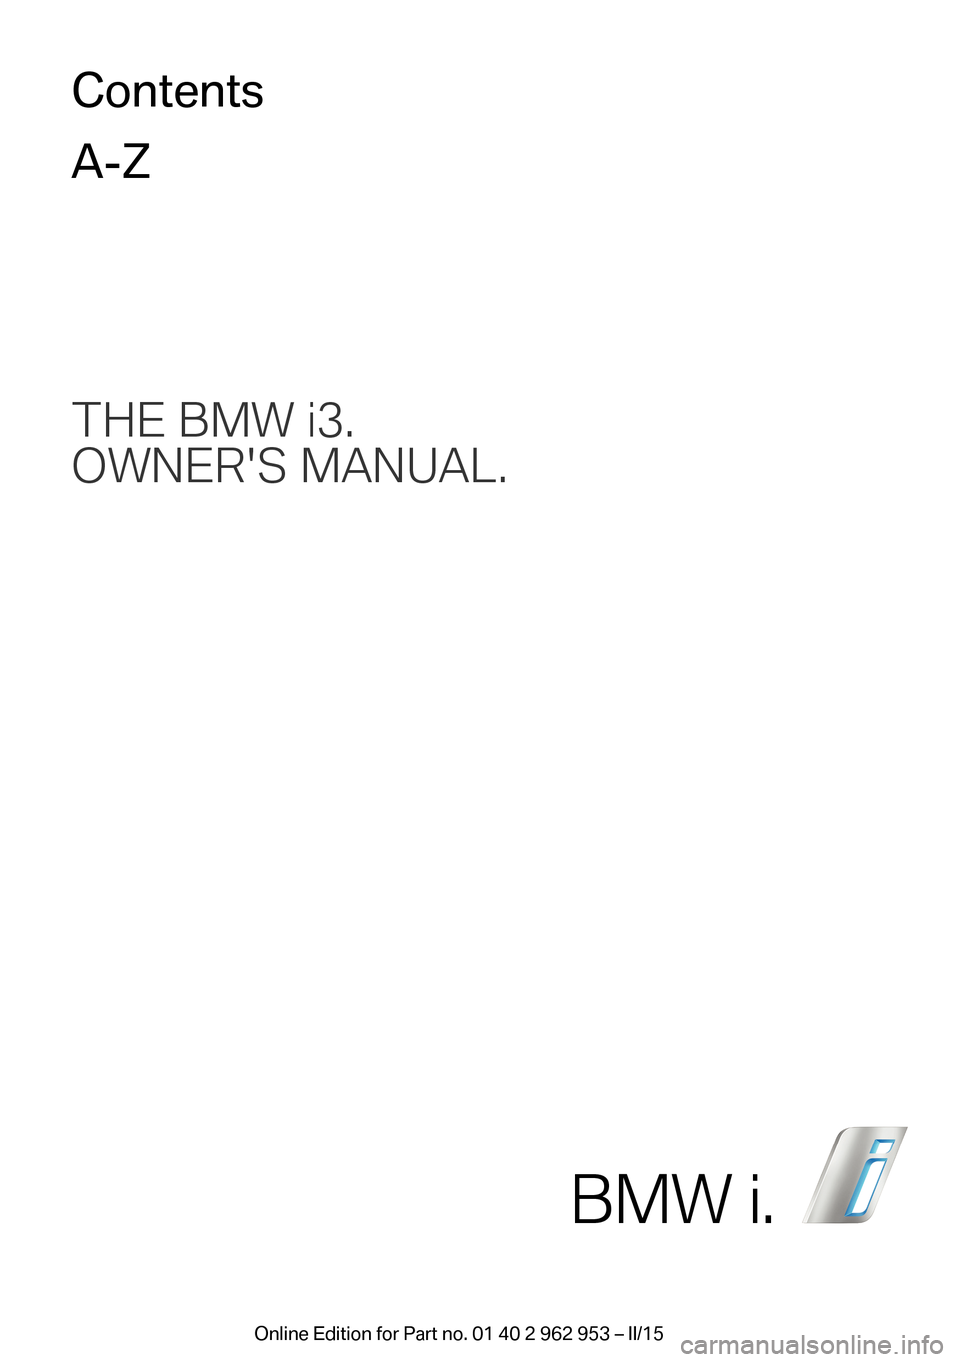 BMW I3 2014 I01 Owners Manual THE BMW i3.
OWNERS MANUAL.ContentsA-Z
BMW i. 